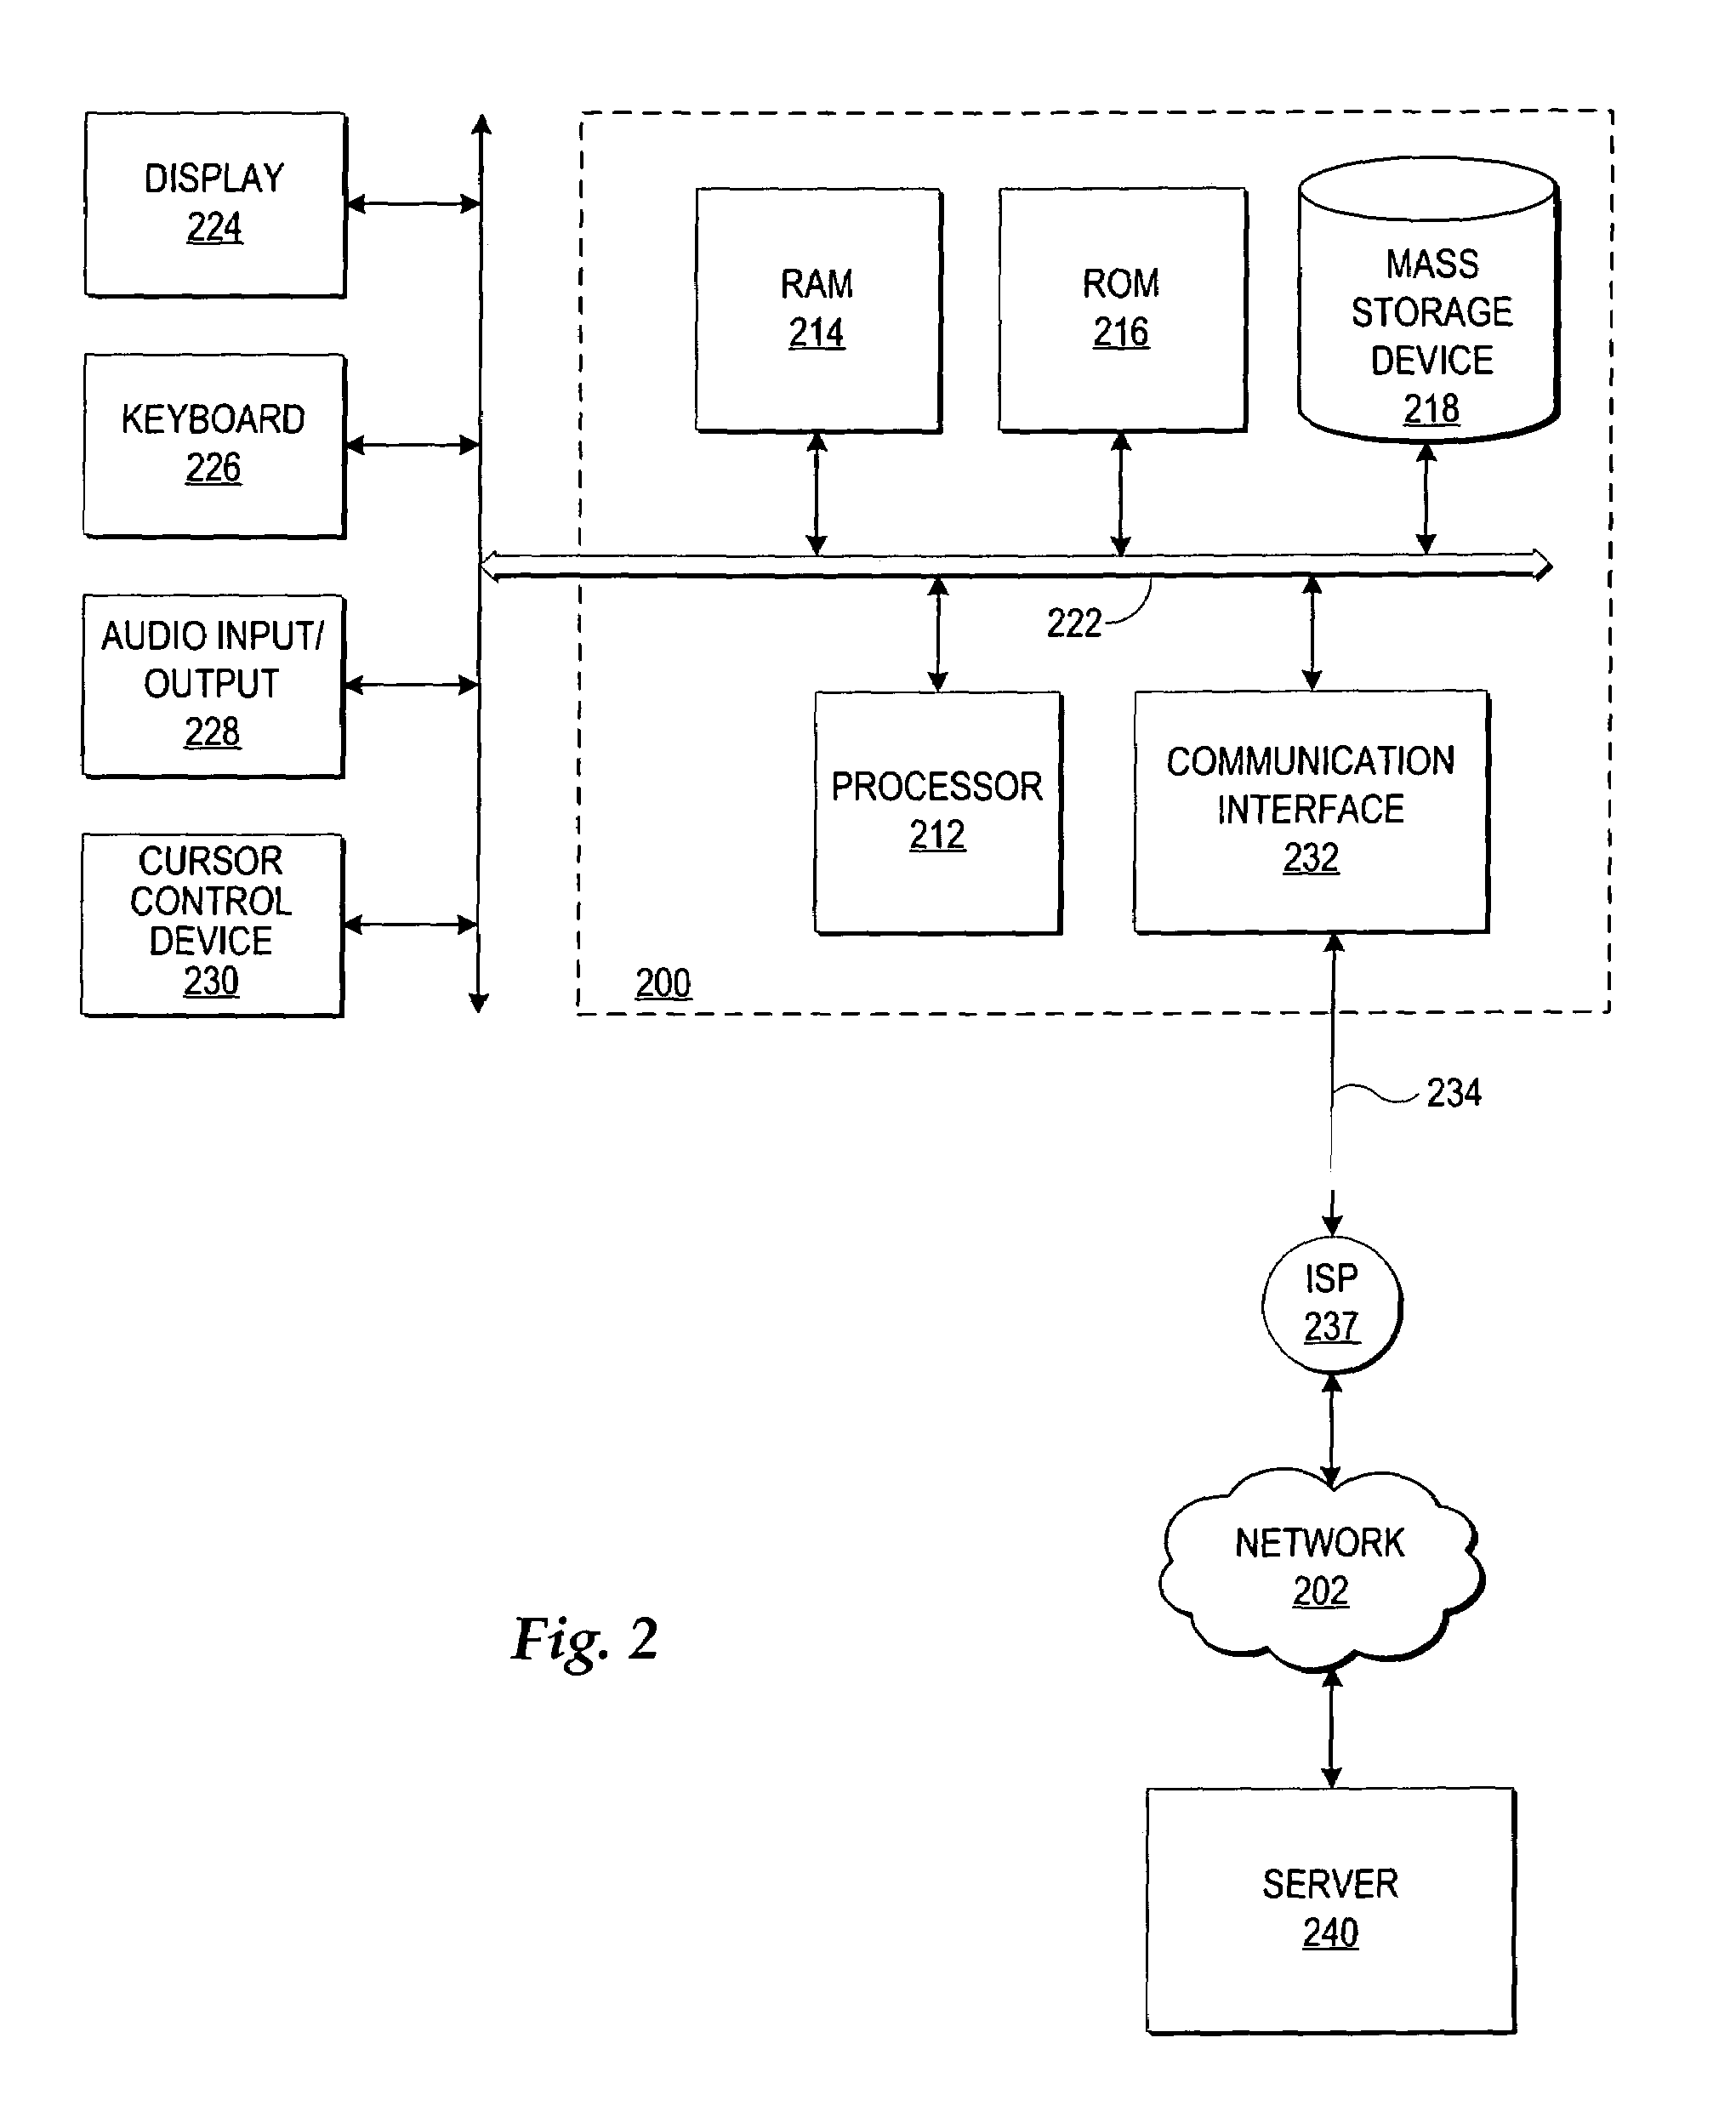 Security screening of electronic devices by device identifier